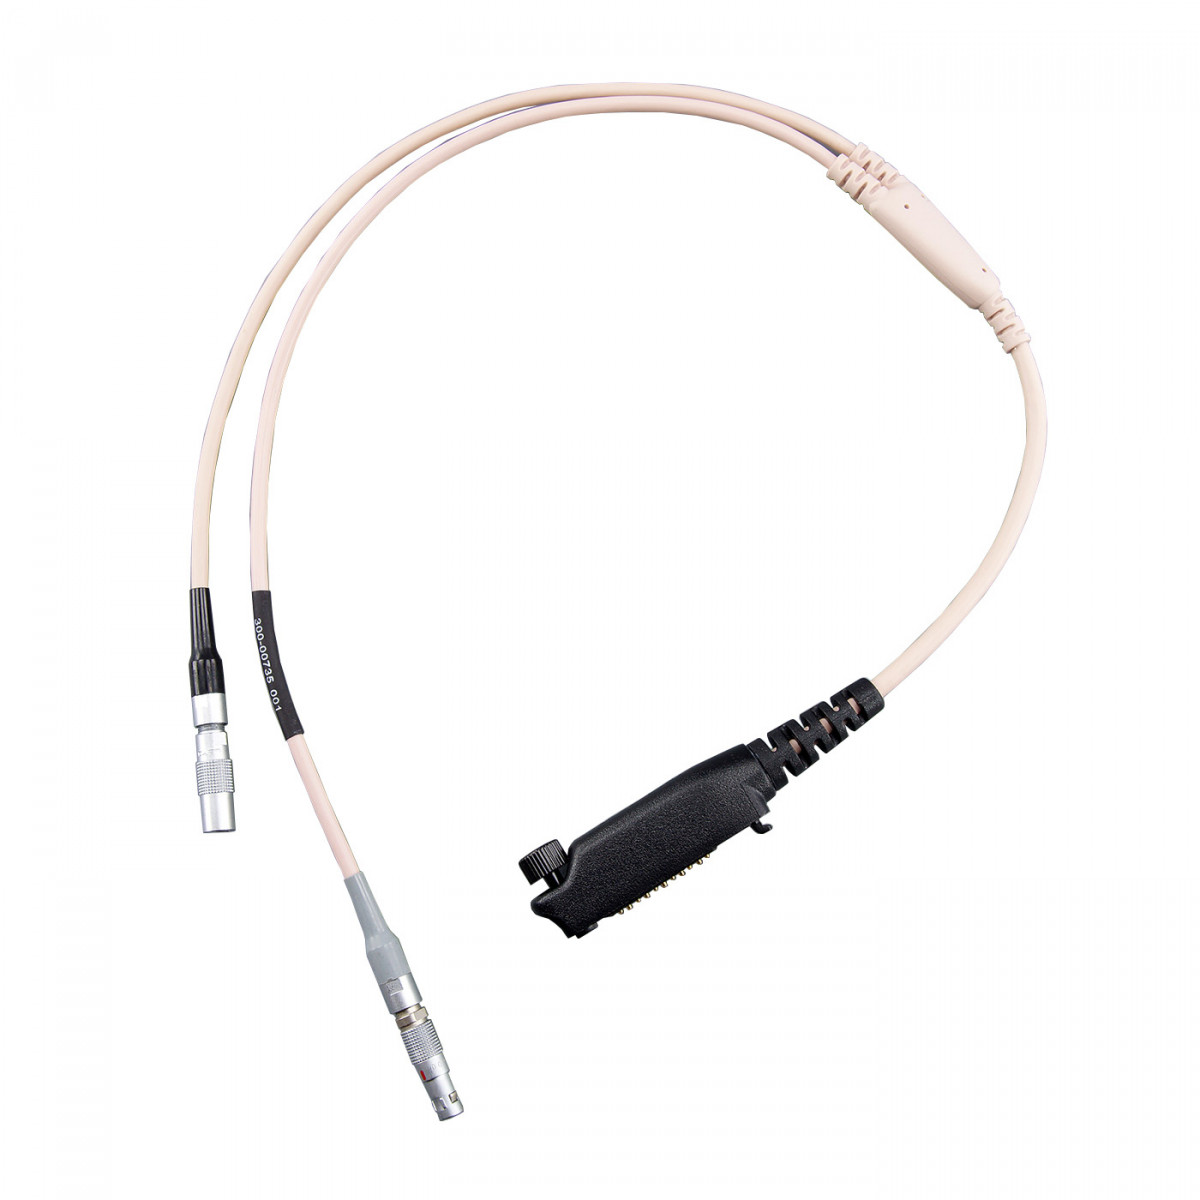 SEPURA accessory connection cable RCU for STP8/9000, SC20 and SC21 300-00735